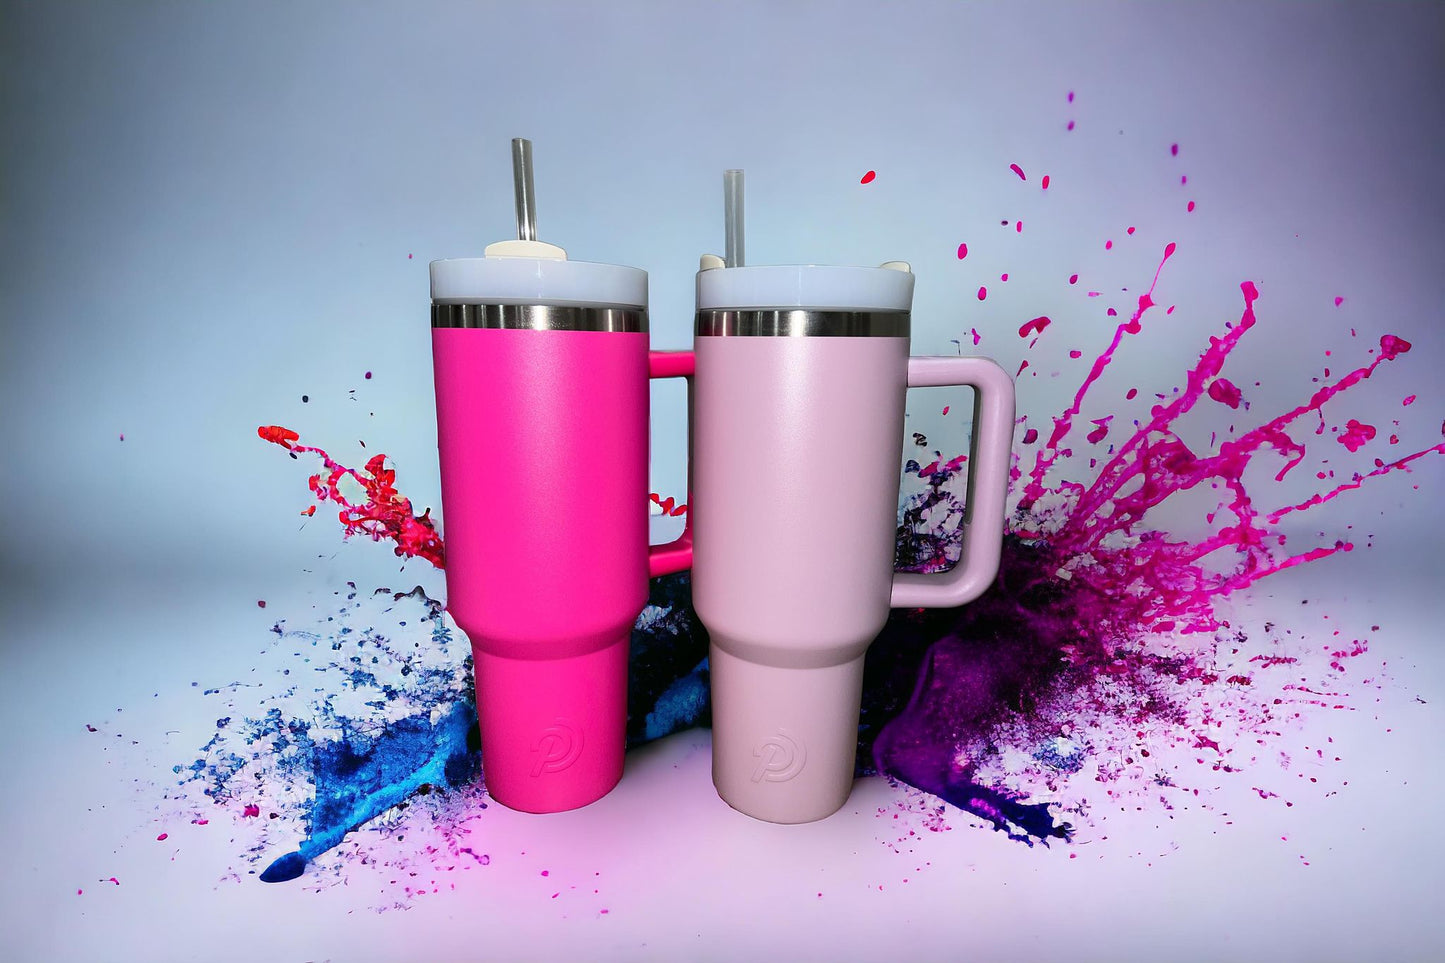 40oz 1.2l tumbler 2 pink stainless steel double wall insulated